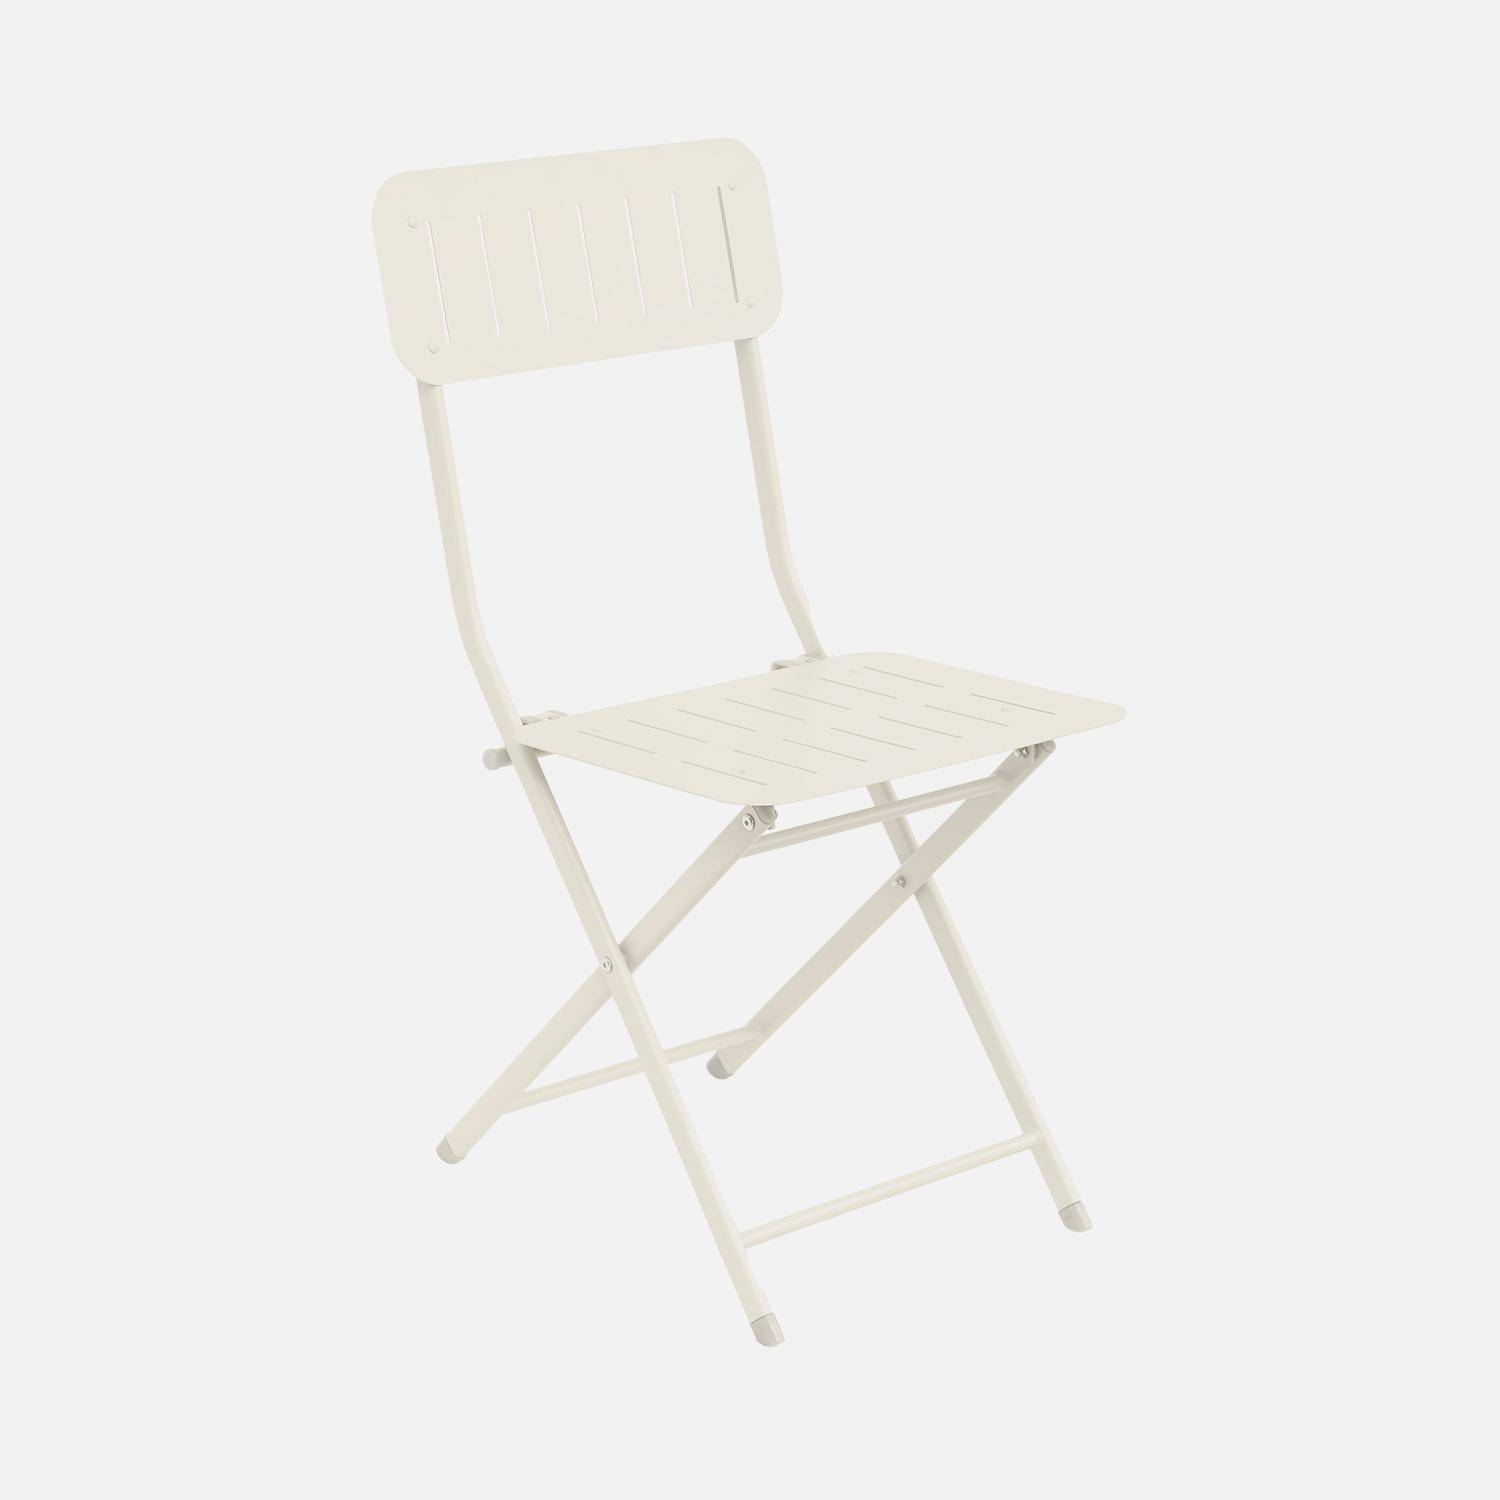 Off-white folding bistro-style garden table with 2 folding chairs in sturdy galvanised steel Photo3